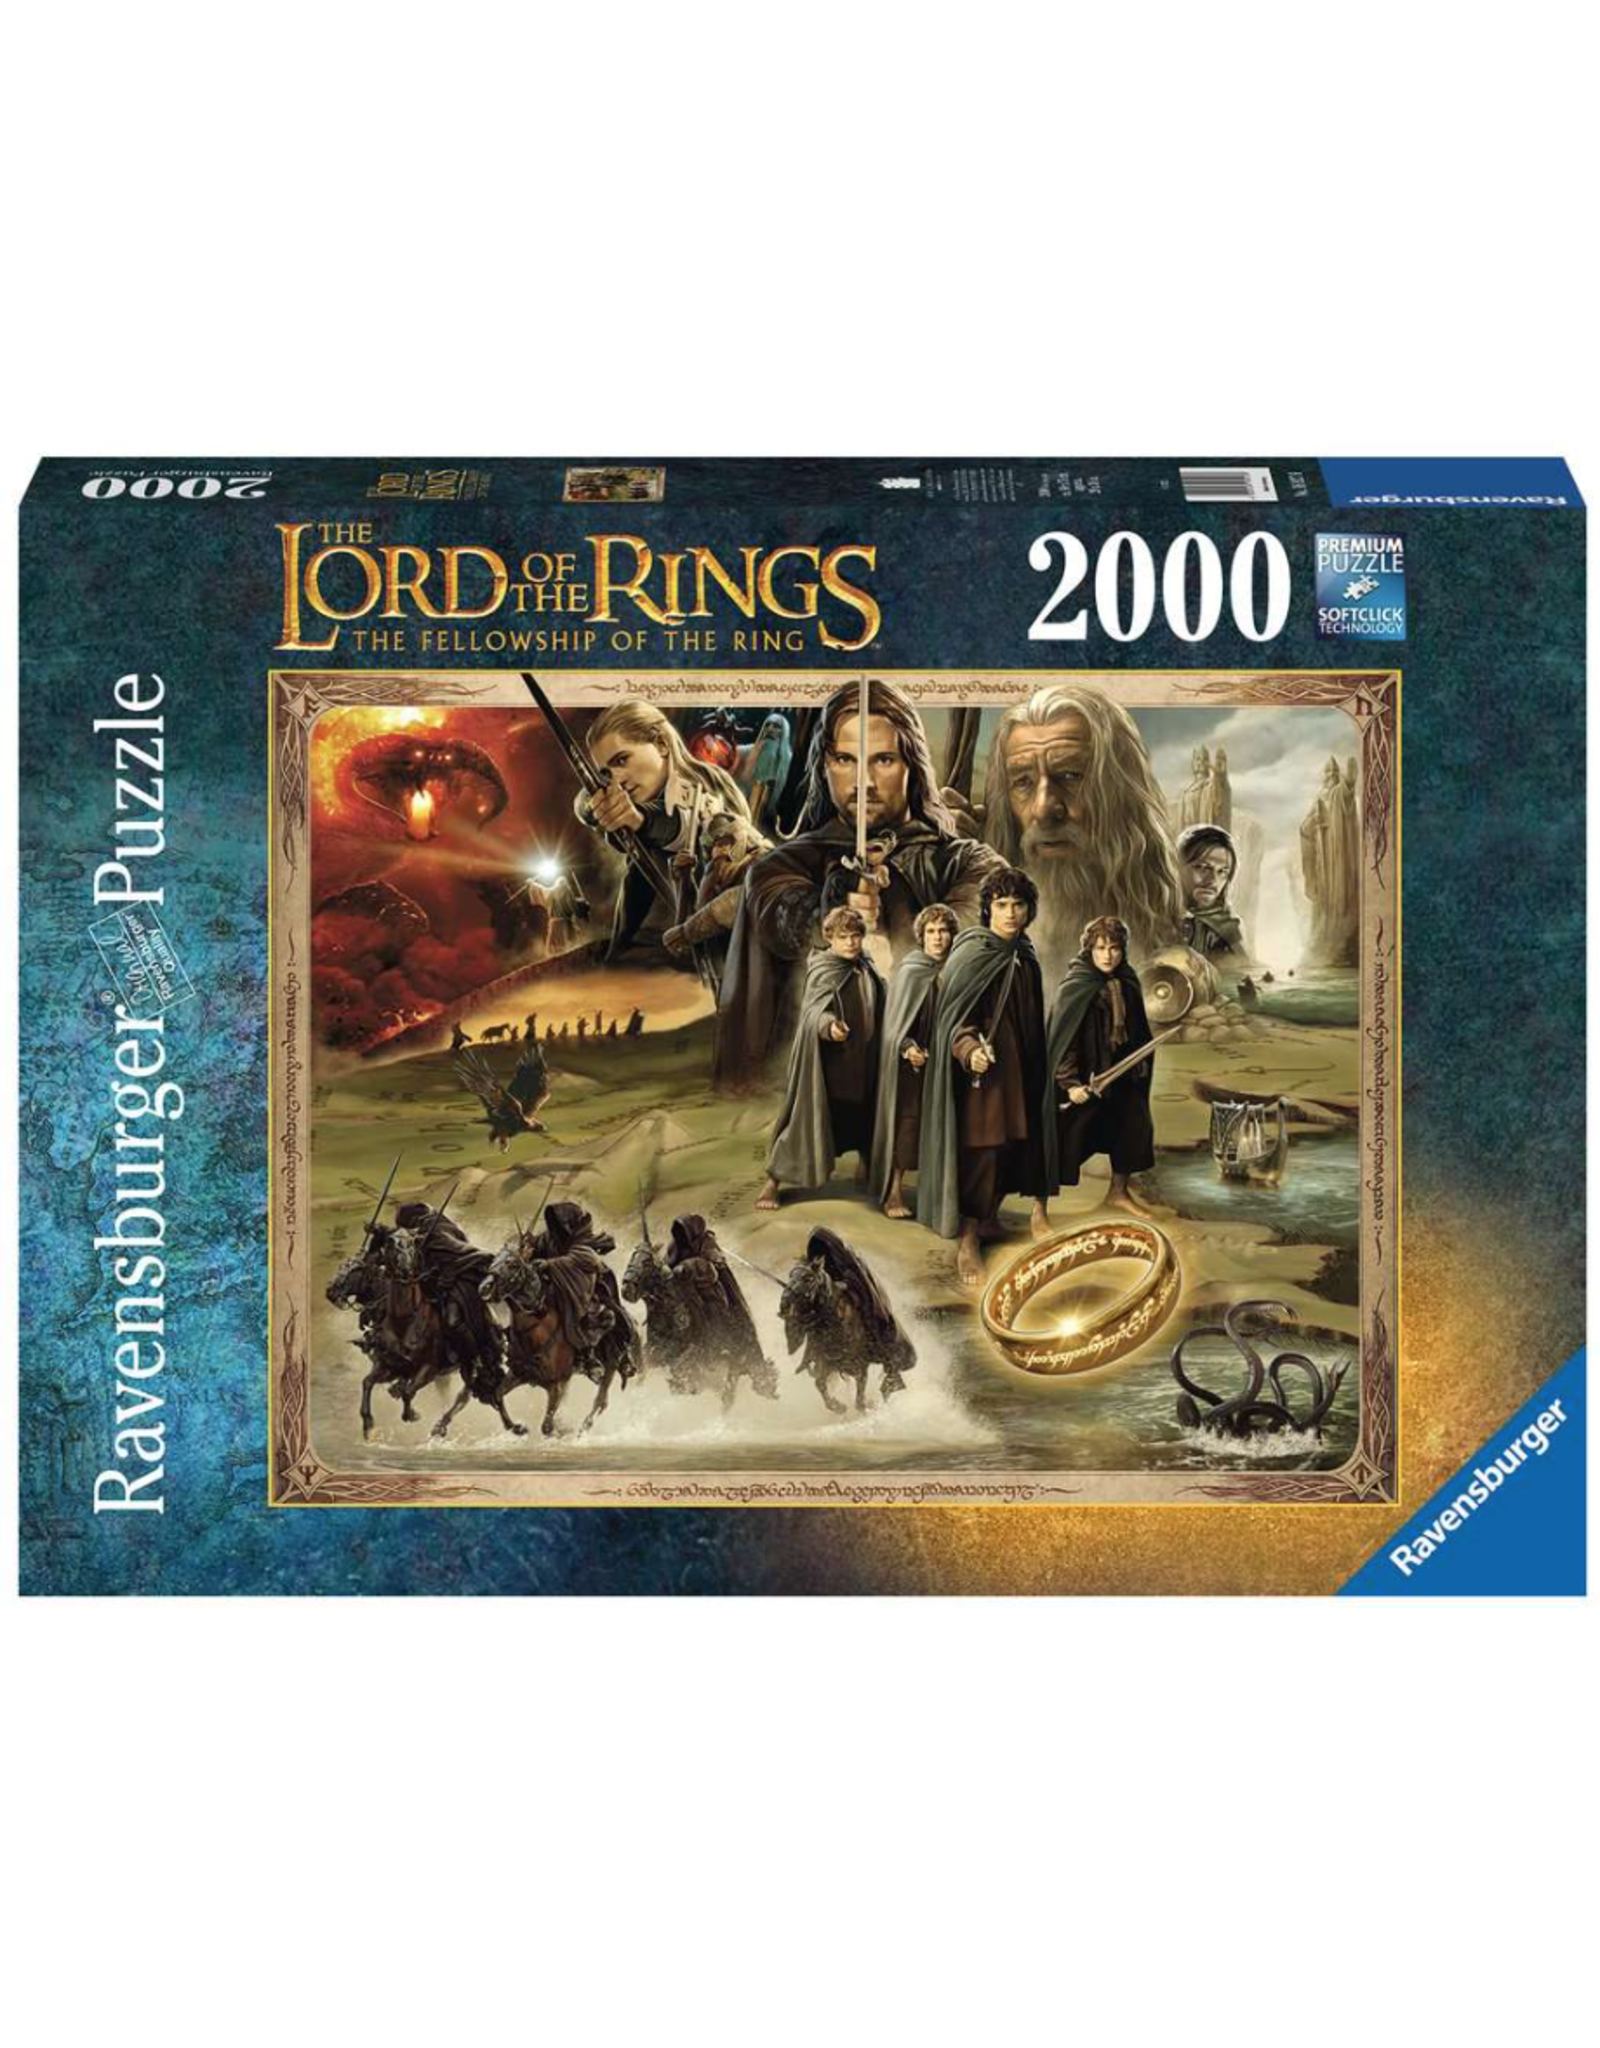 Ravensburger 2000 pcs. Lord of the Rings: The Fellowship of the Ring Puzzle